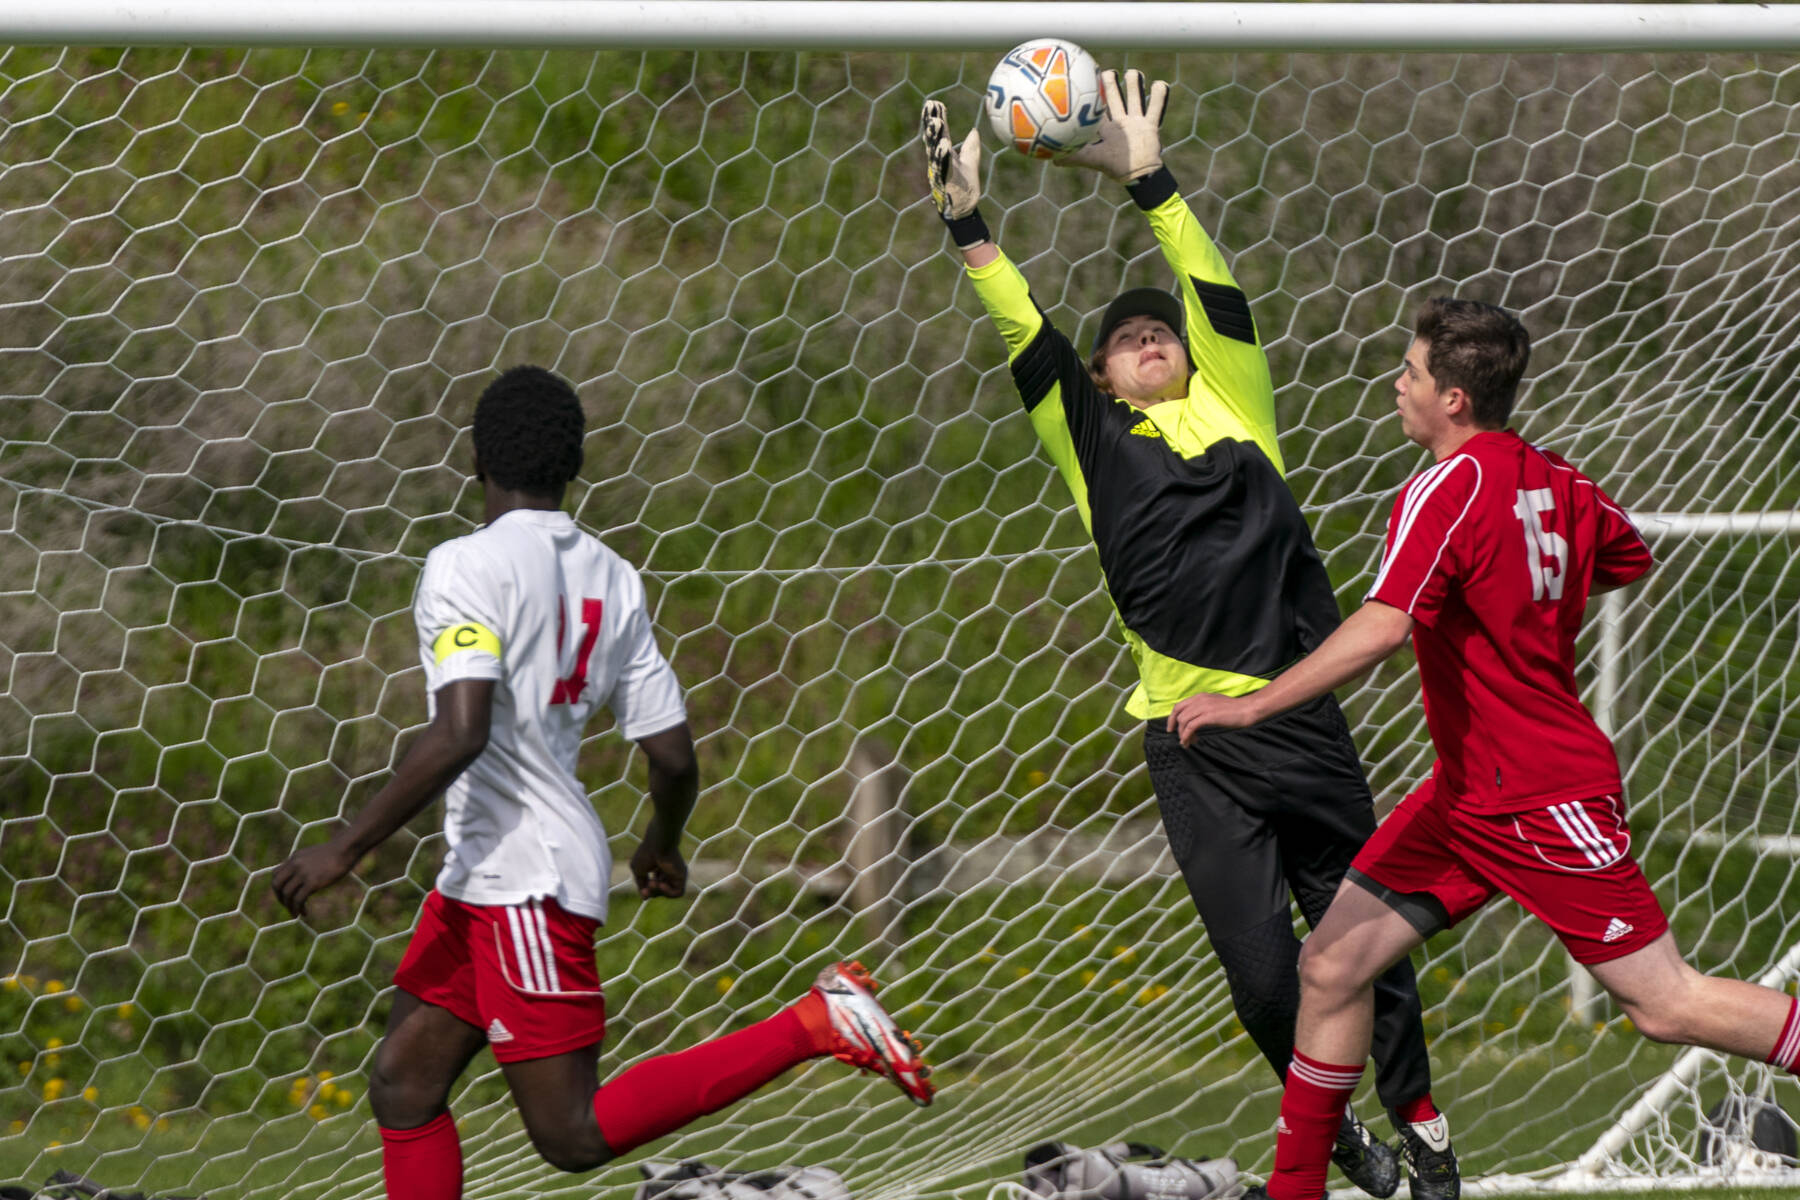 East Jefferson goalkeeper Haven McMillen makes a leaping save against Seattle Christian during a game Saturday at Memorial Field in Port Townsend. Seattle Christian’s forward Olara Parodi, 11, and East Jefferson’s Micajah Shifflett, 15, were in on the play. (Steve Mullensky/for Peninsula Daily News)